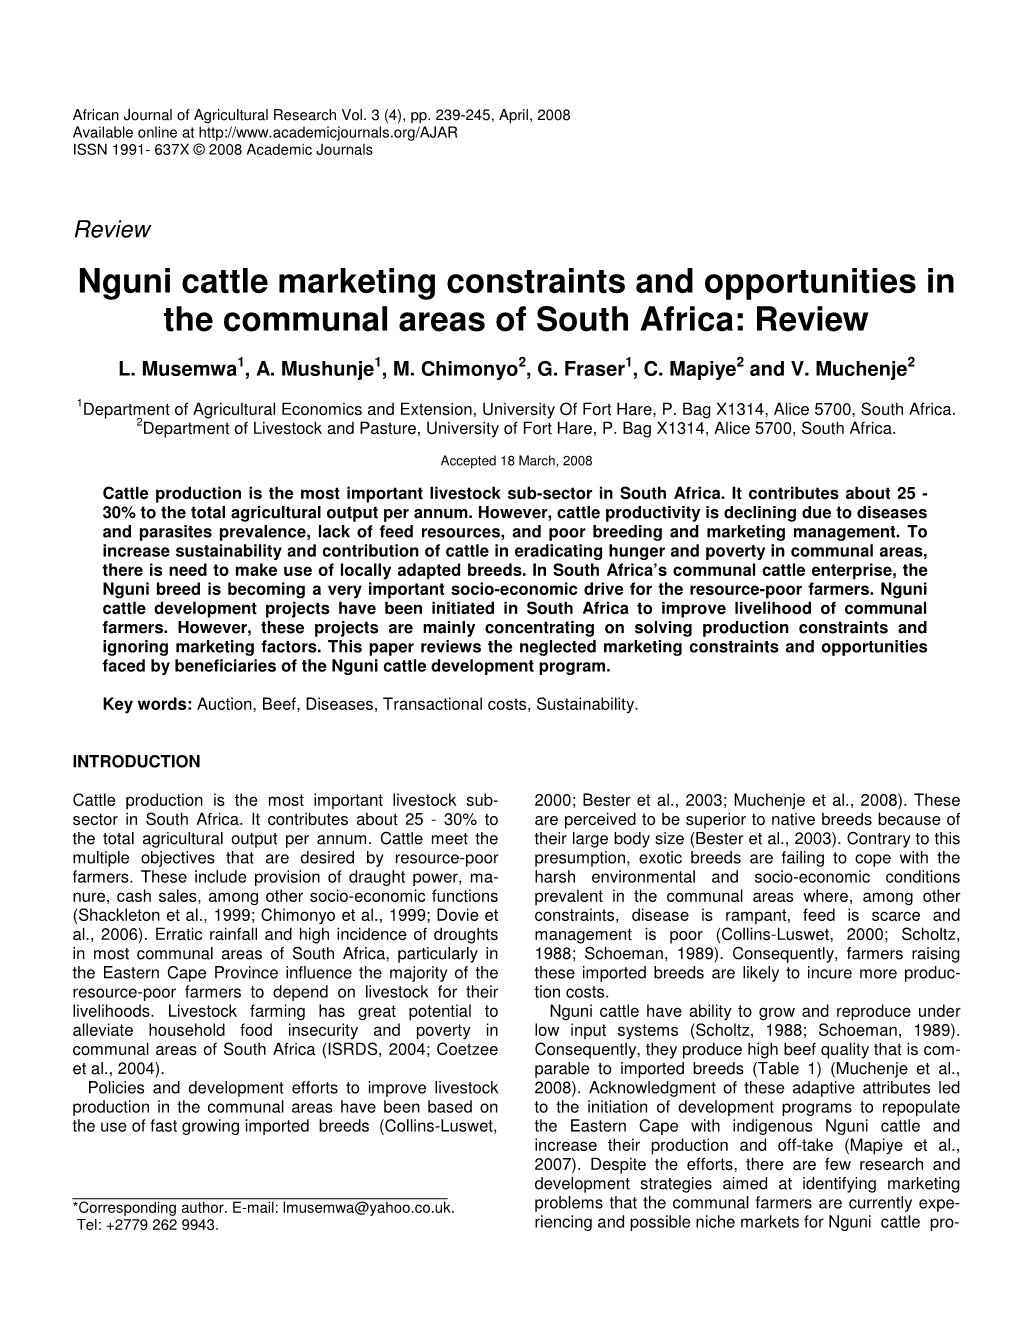 Nguni Cattle Marketing Constraints and Opportunities in the Communal Areas of South Africa: Review